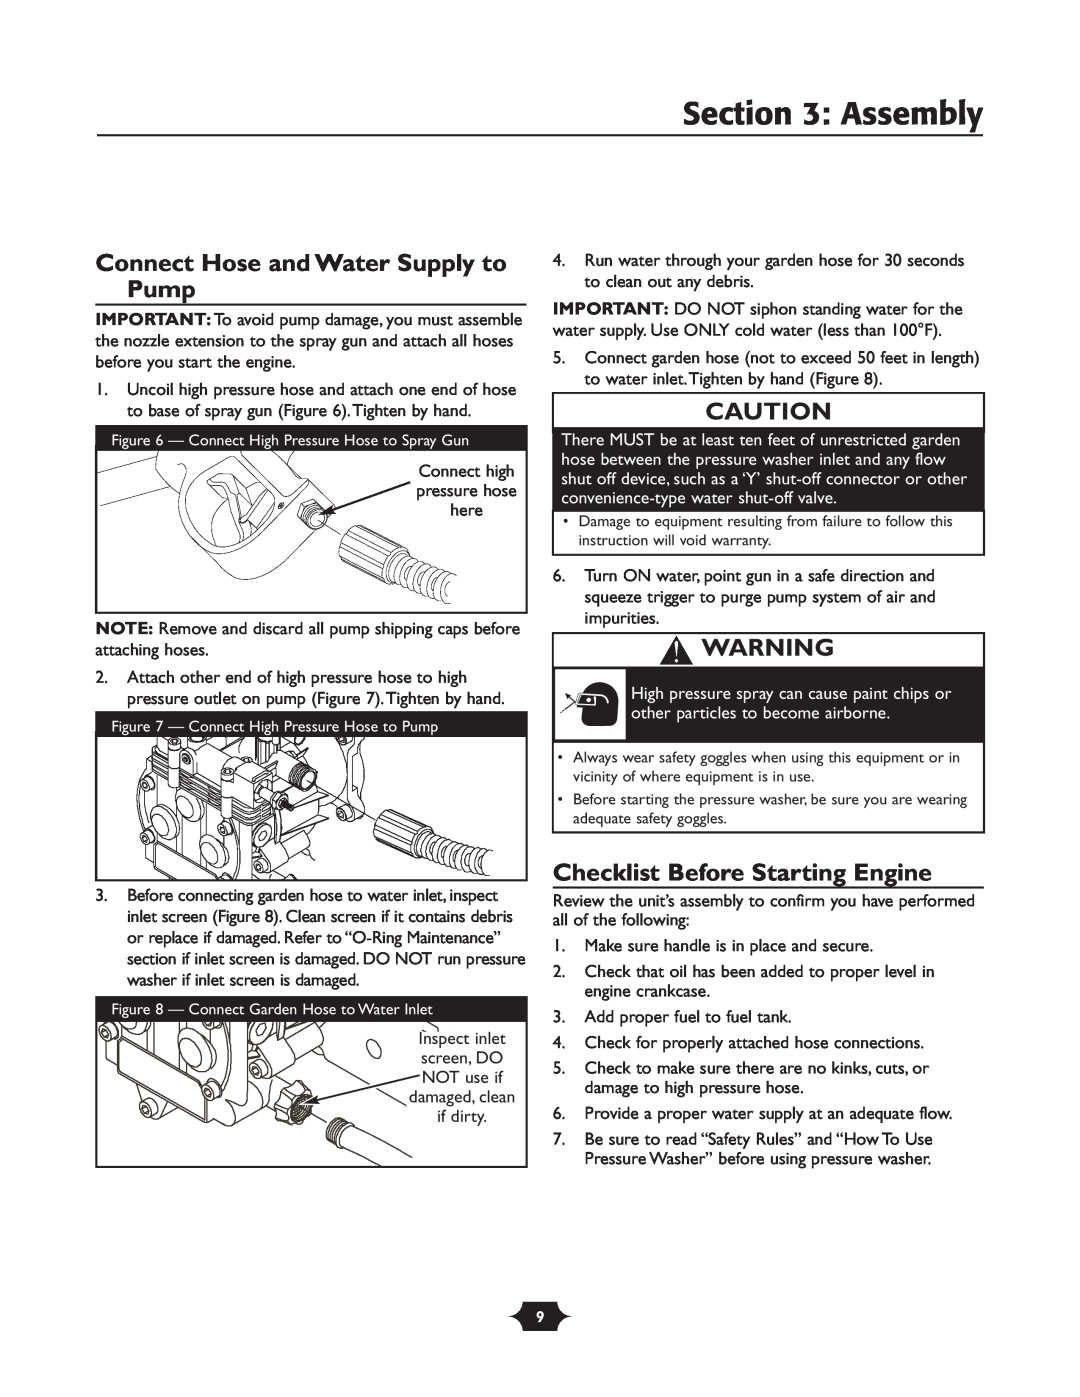 Briggs & Stratton 20263 manual Connect Hose and Water Supply to Pump, Checklist Before Starting Engine, Assembly 